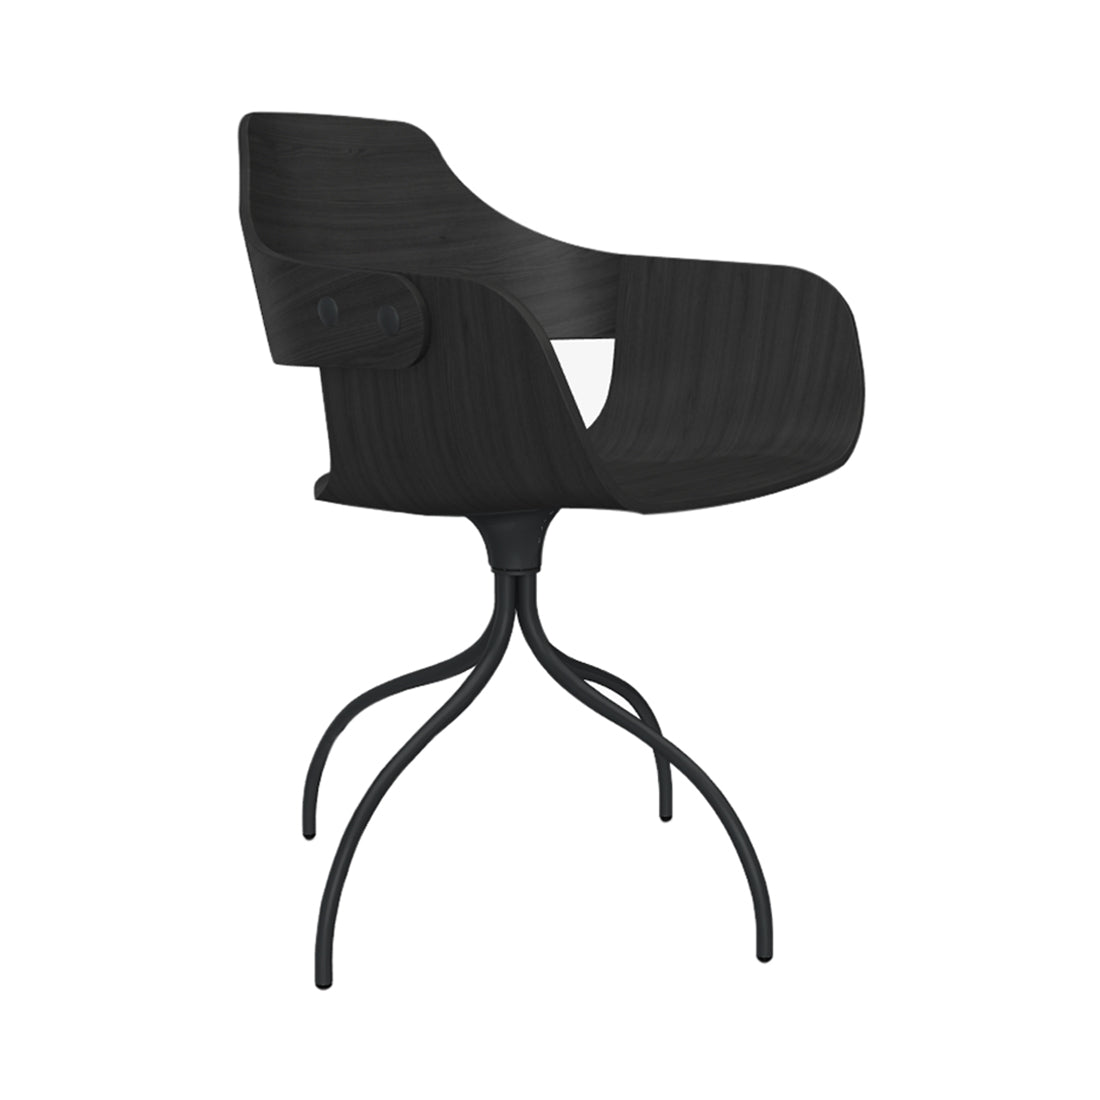 Showtime Chair with Swivel Base: Ash Stained Black + Anthracite Grey